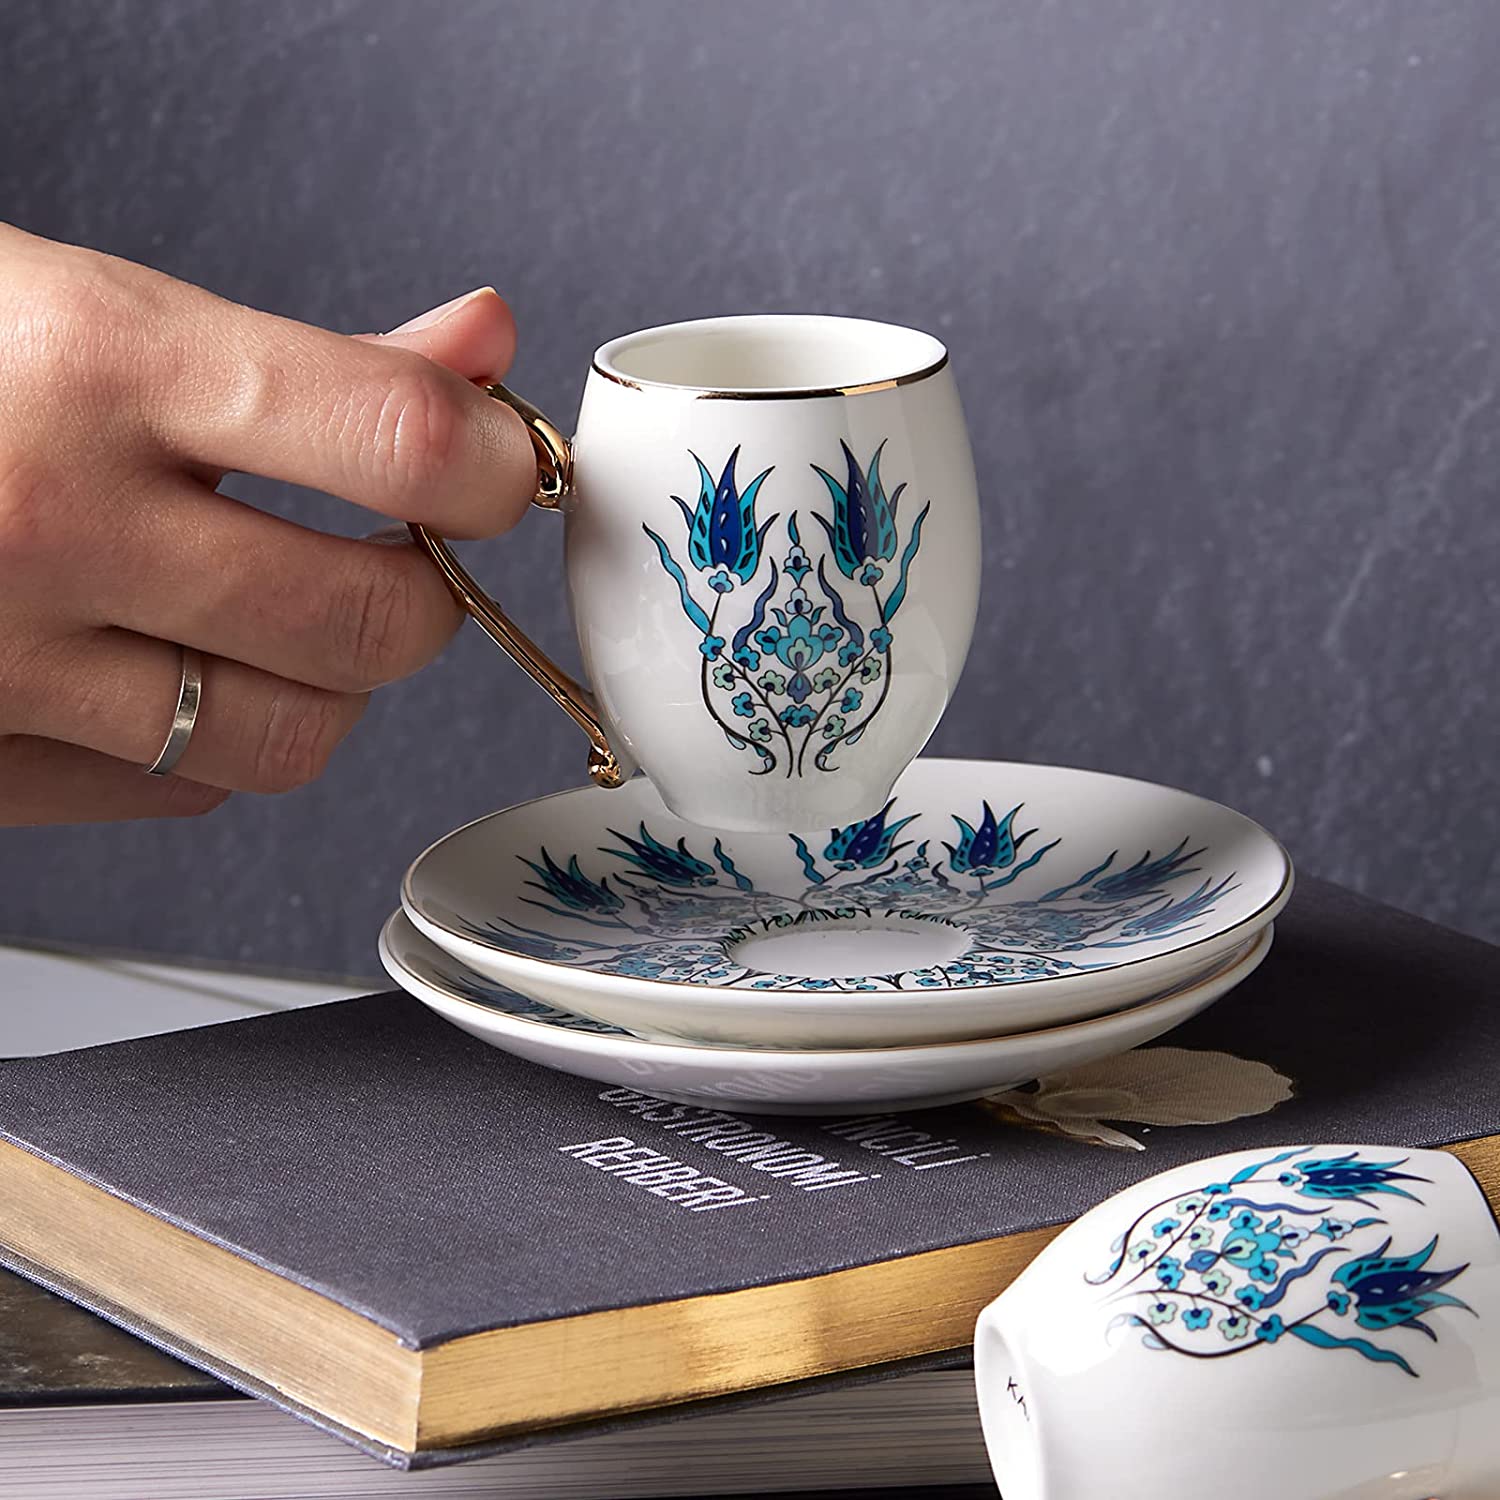 Woman's hand holding IZNIK Turkish Coffee Cup on a book